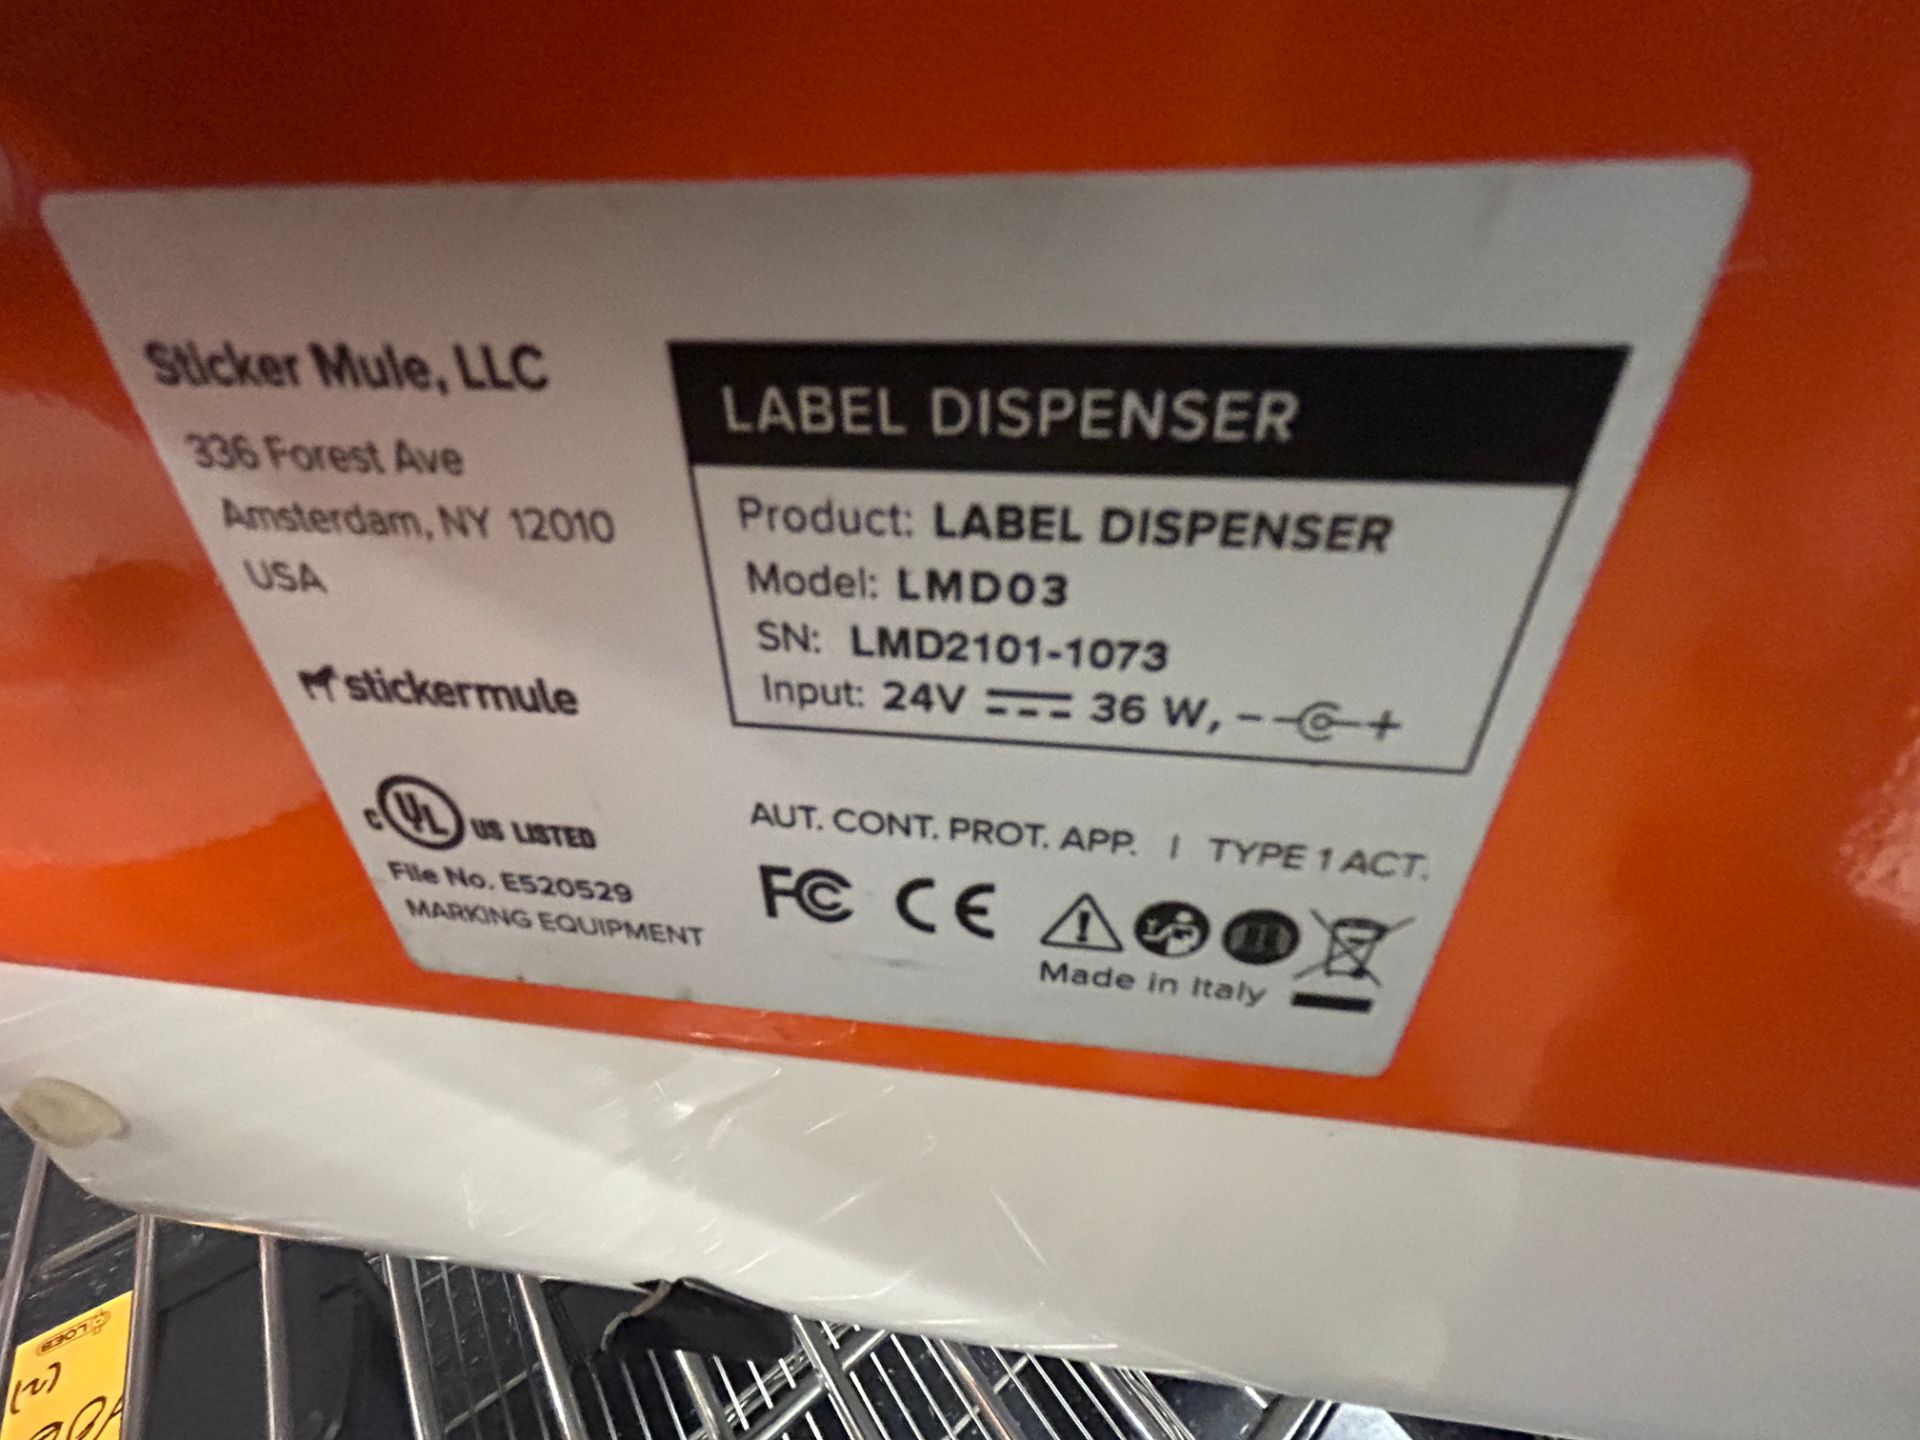 Sticker Mule Mdl LMD03, Lot (4) - Label Dispensers, Auto Shutoff. Supports a Roll Label Core - Image 10 of 13